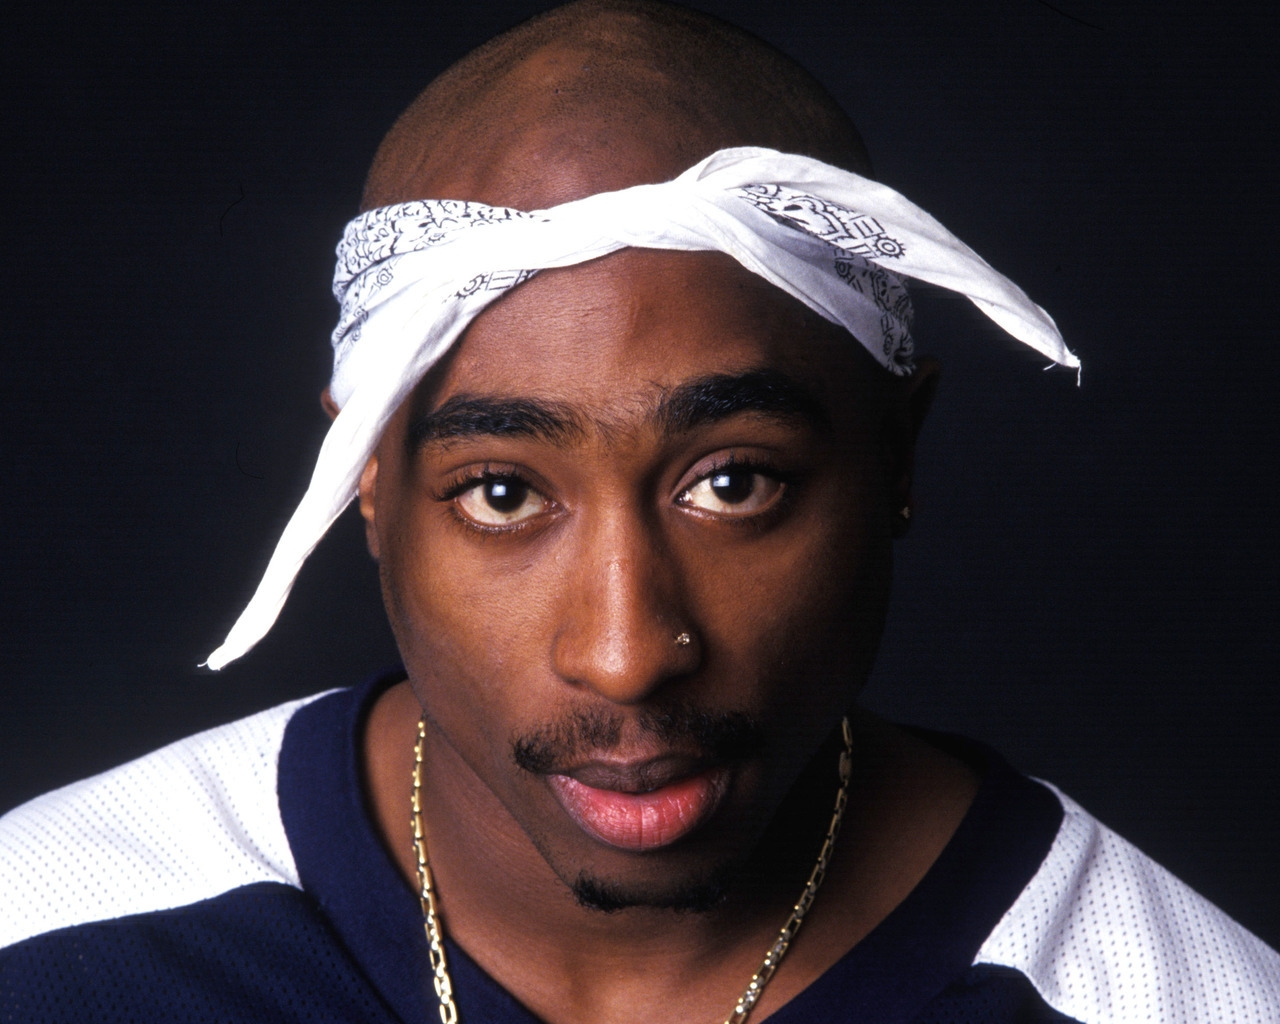 2Pac for 1280 x 1024 resolution